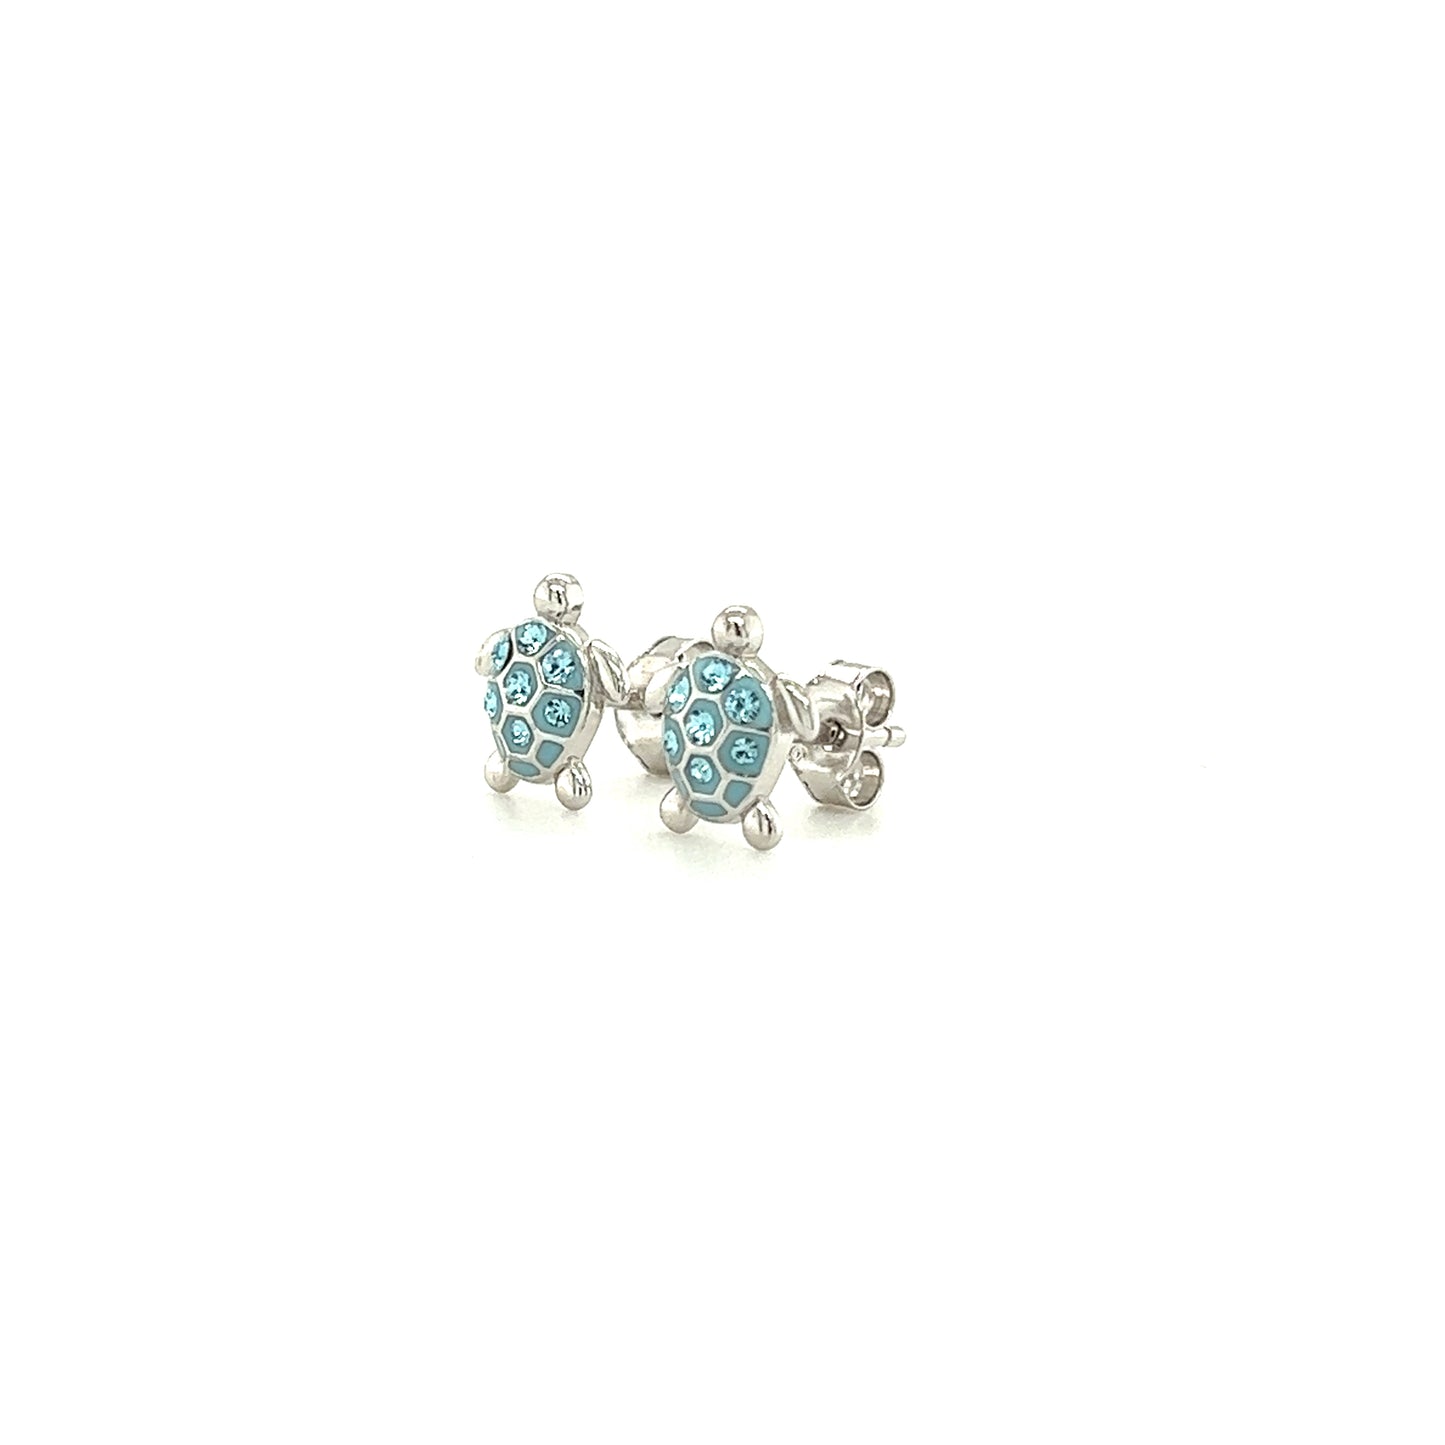 Sea Turtle Stud Earrings with Aqua Crystals in Sterling Silver Right Side View